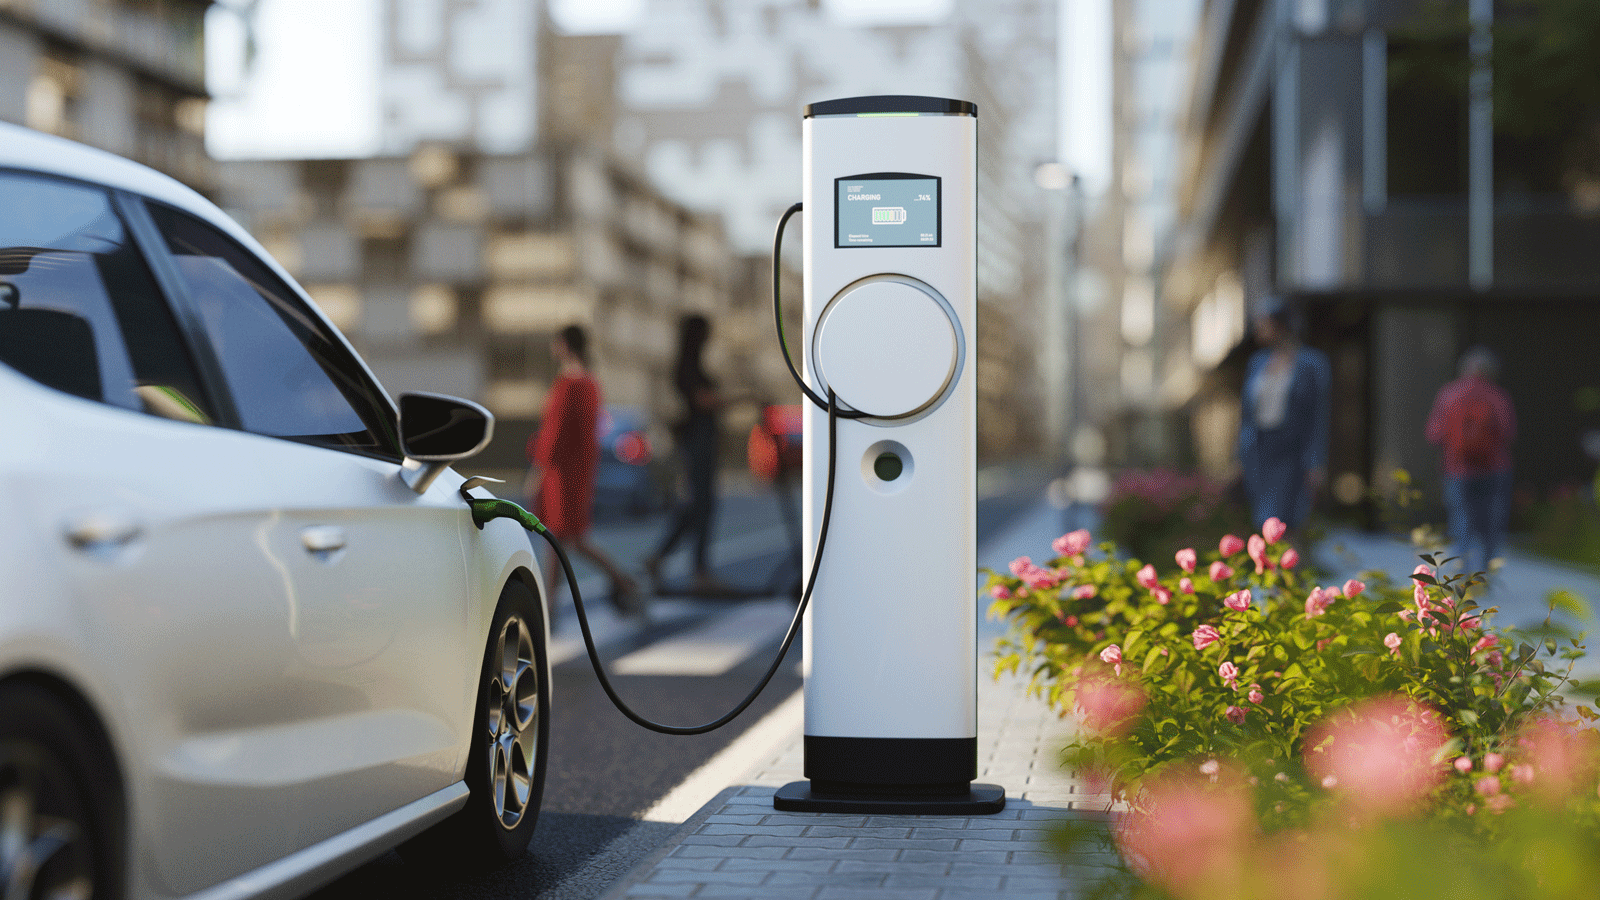 ChargeUK calls on the next government to accelerate chargepoint roll-out